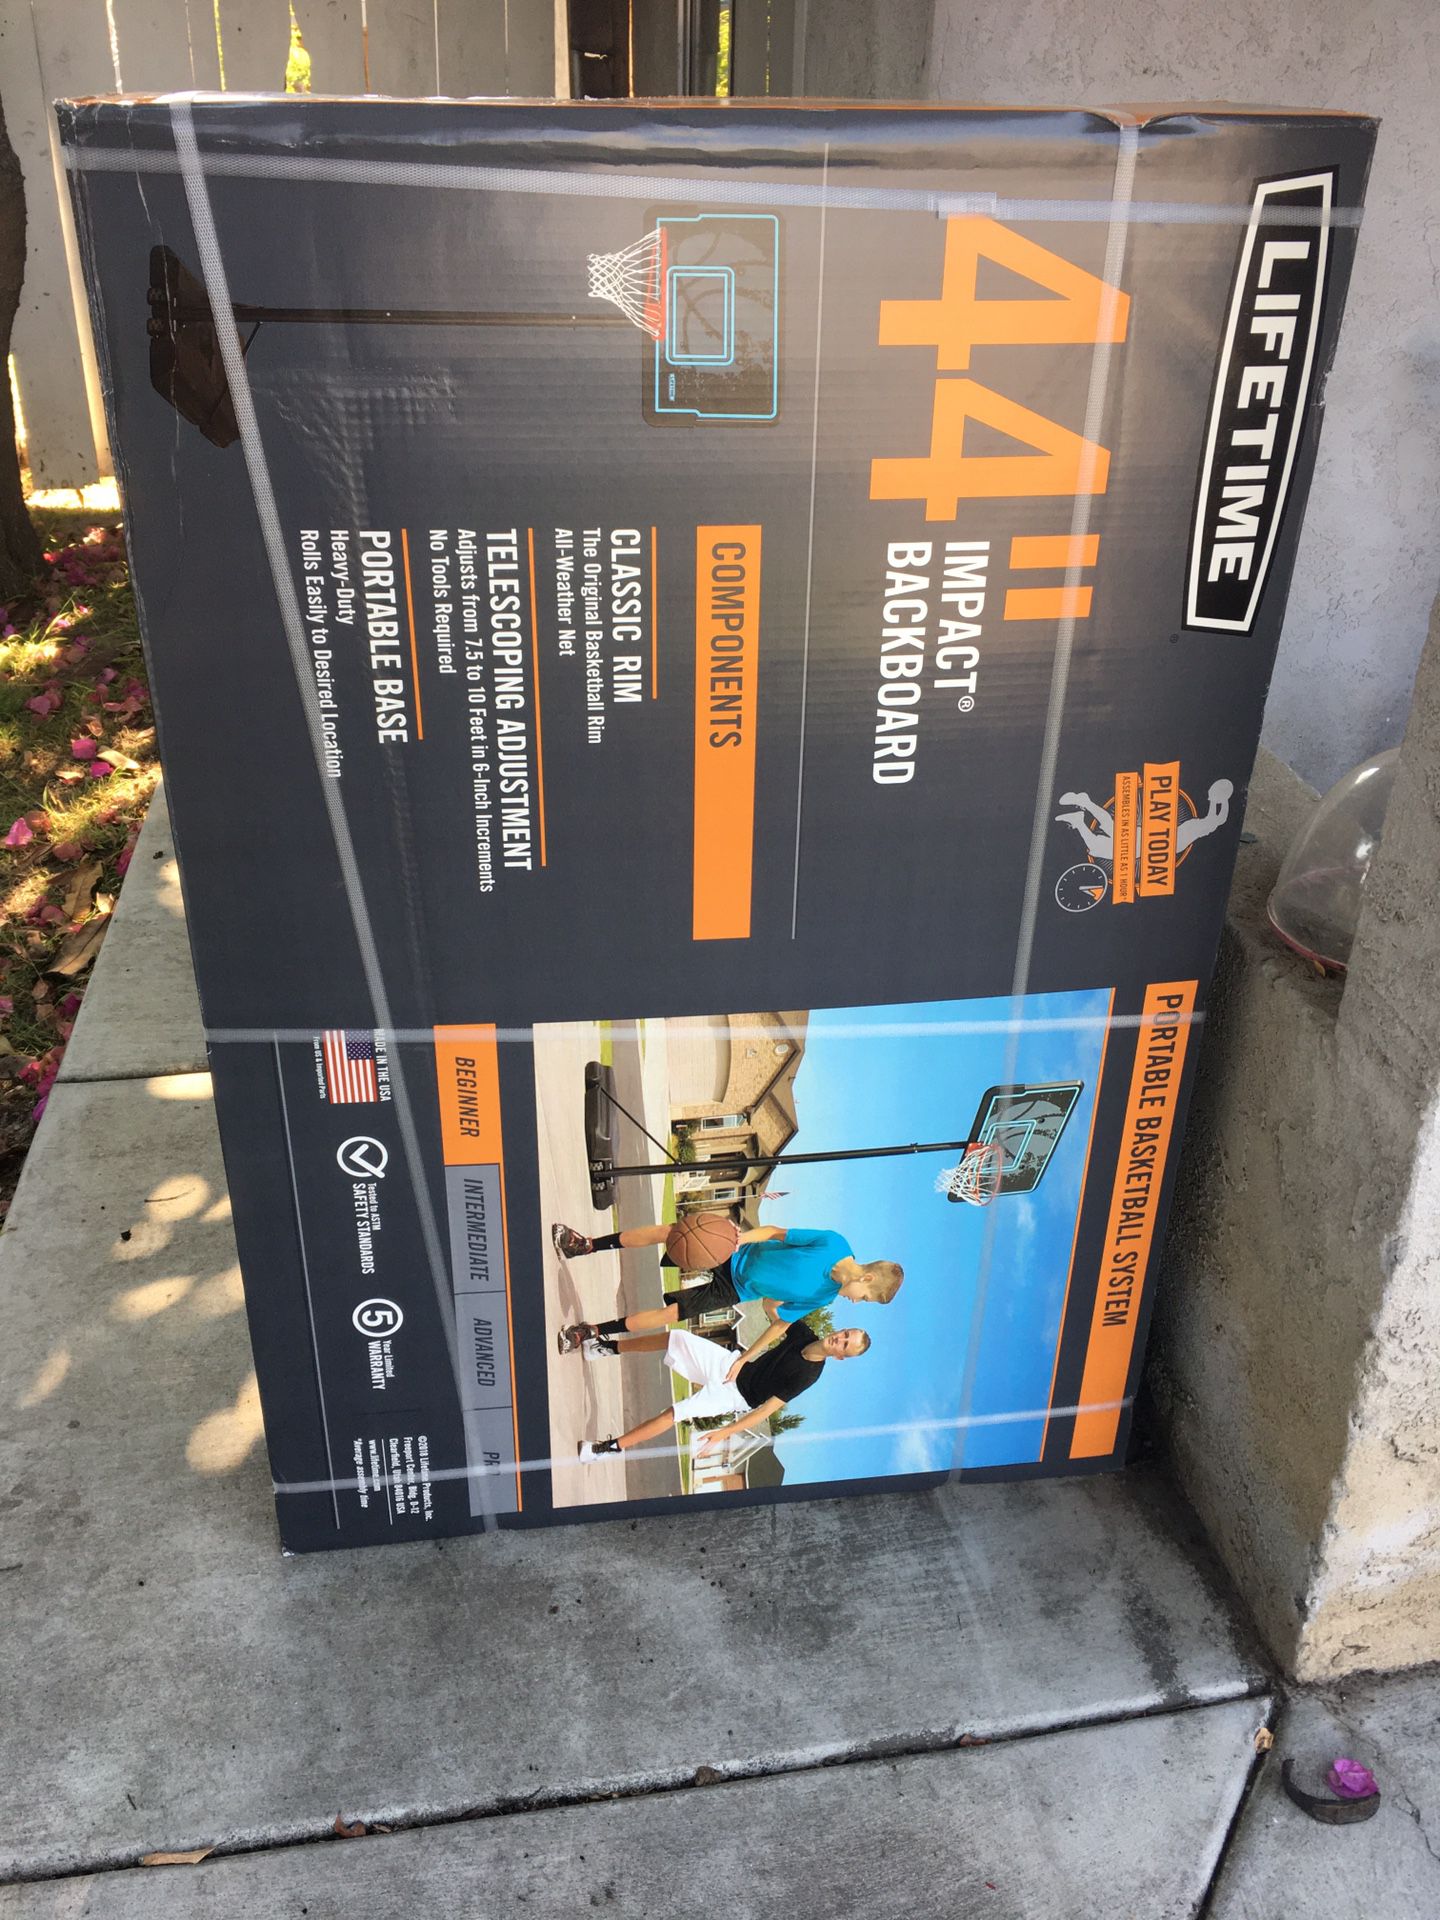 Lifetime 44” impact portable basketball hoop for outdoors NEW IN BOX